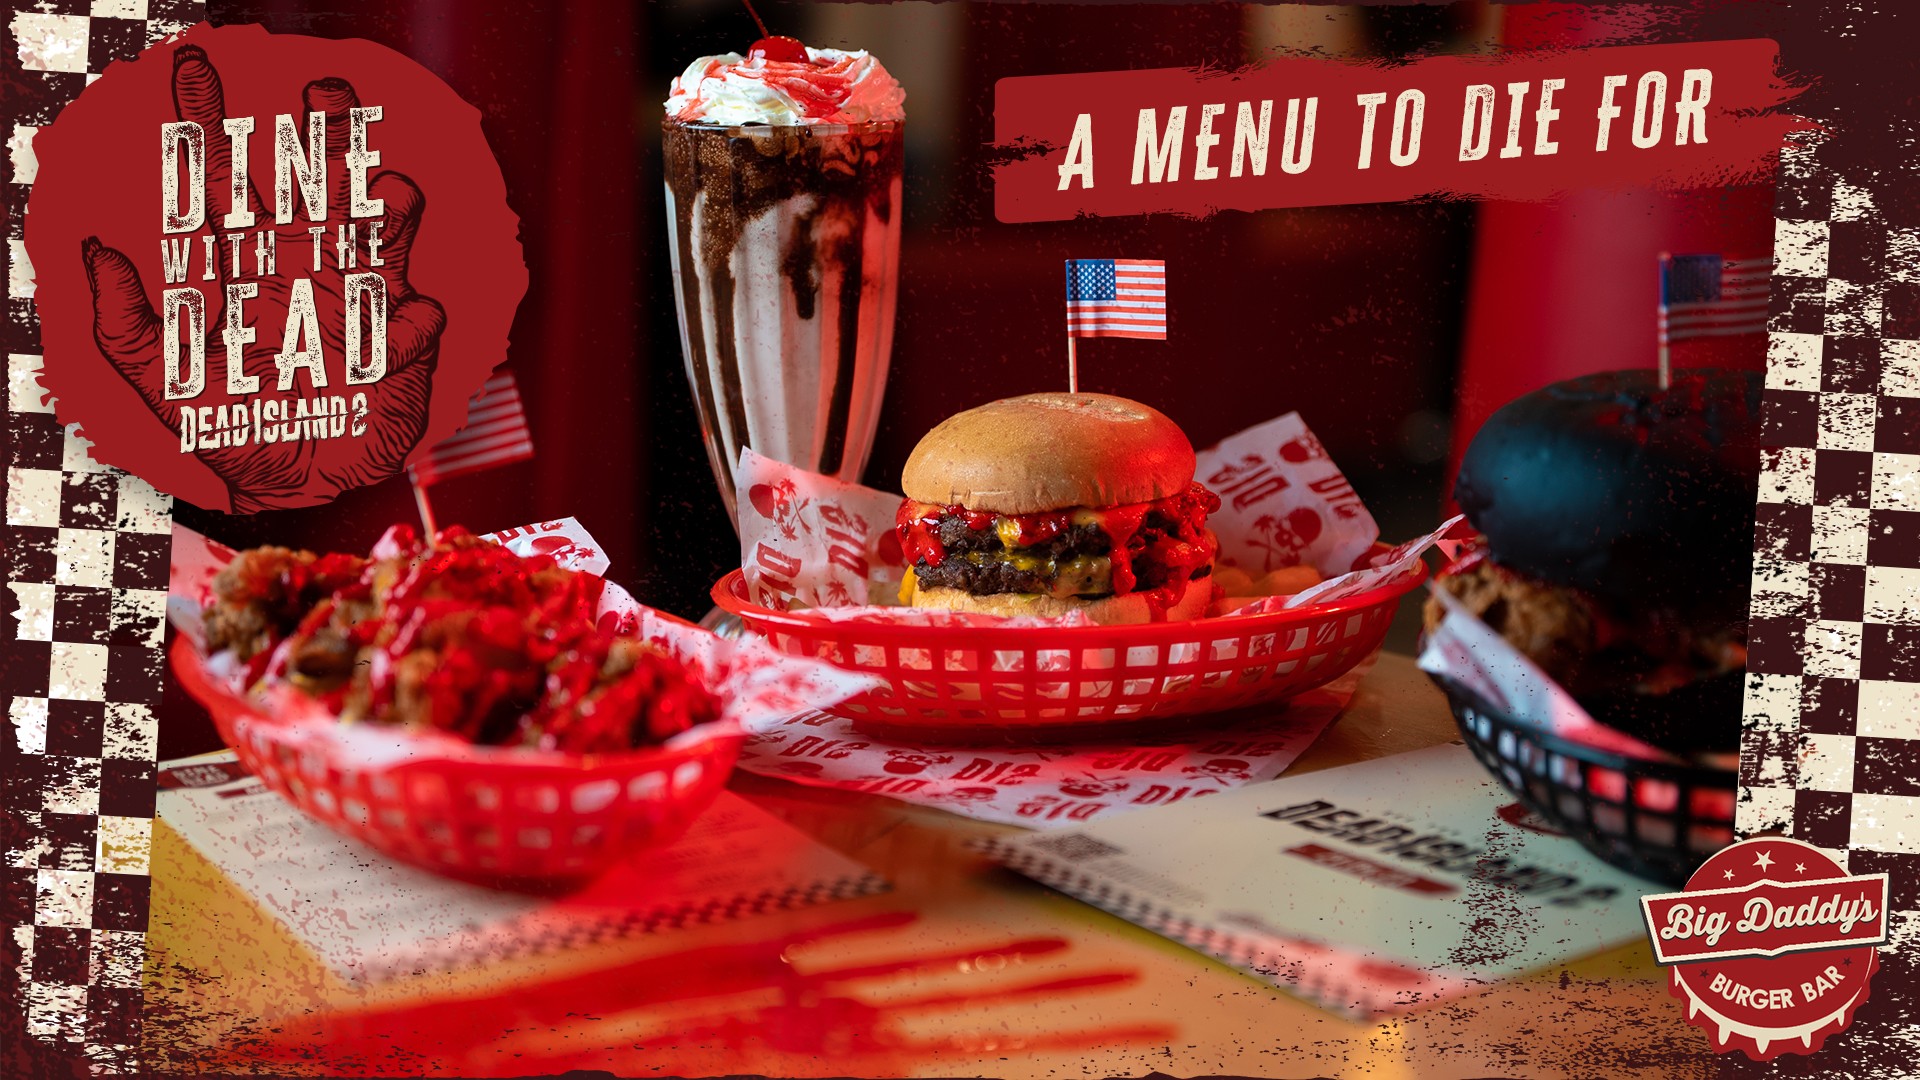 Dead Island 2 & Big Daddy’s Burger Bar Invite You To “Dine With The Dead”